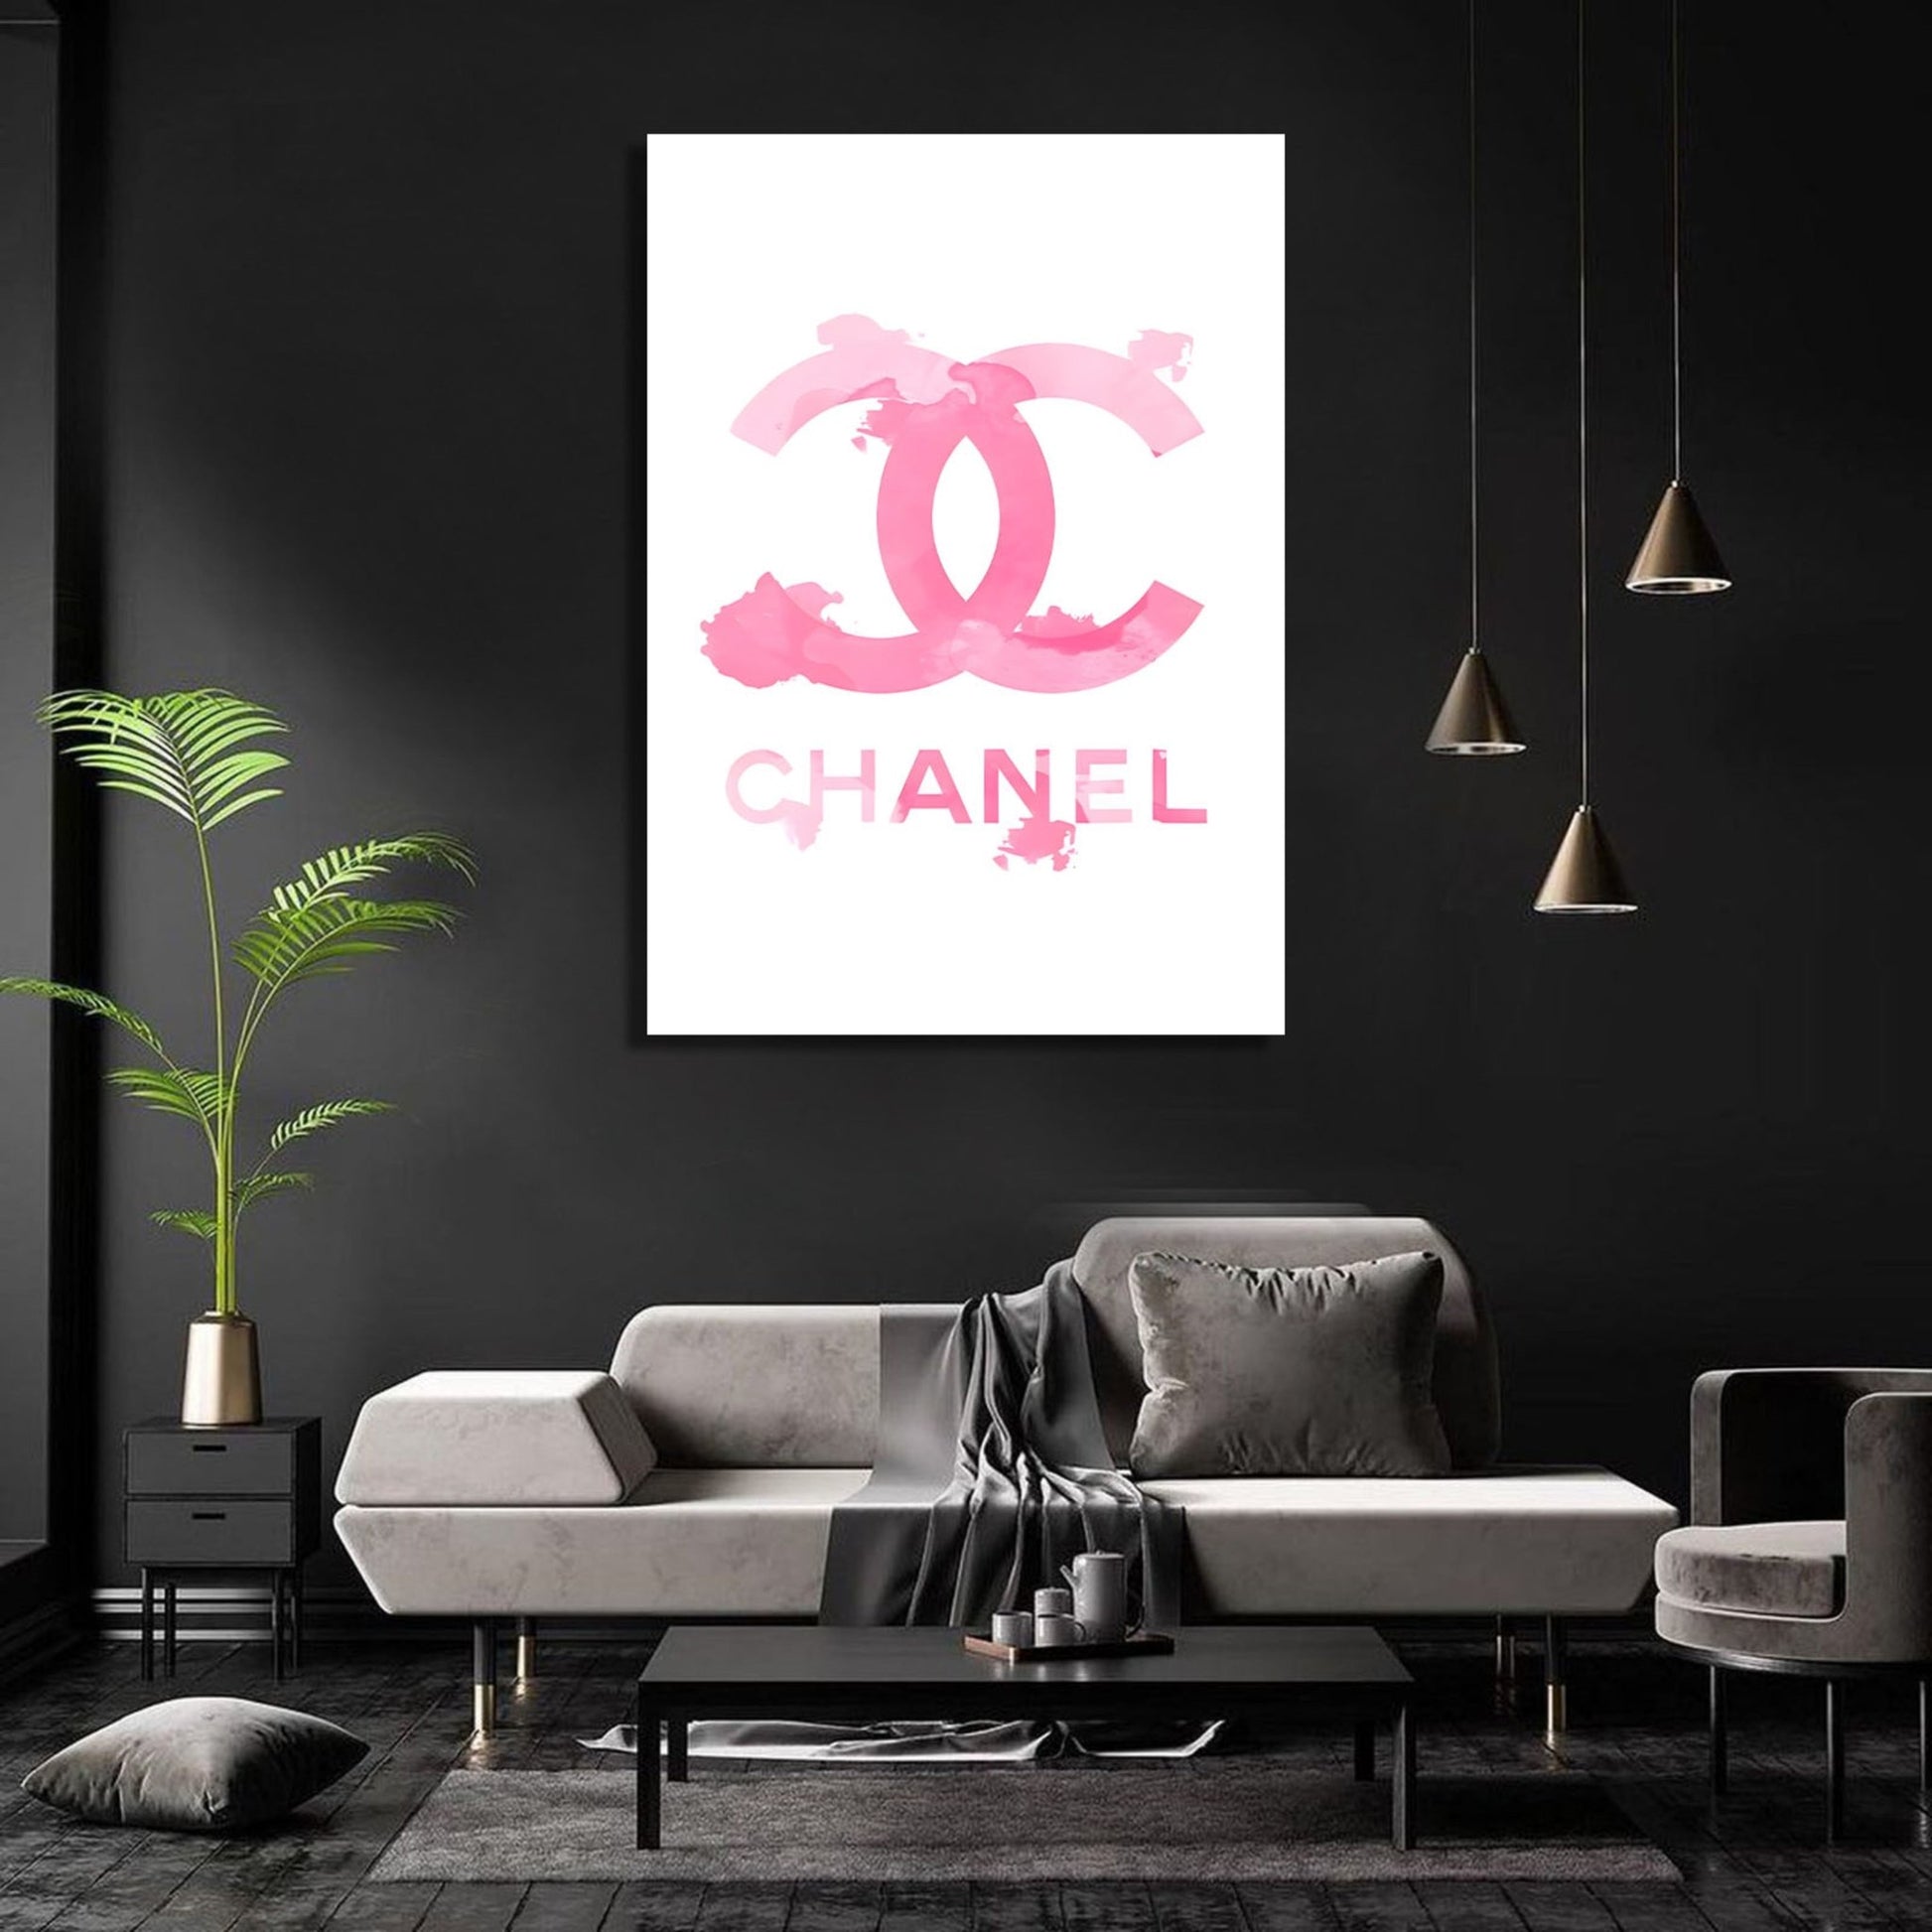 FRAMED Pink Rose Floral Coco Chanel By PopArtQueen 18x18 Art